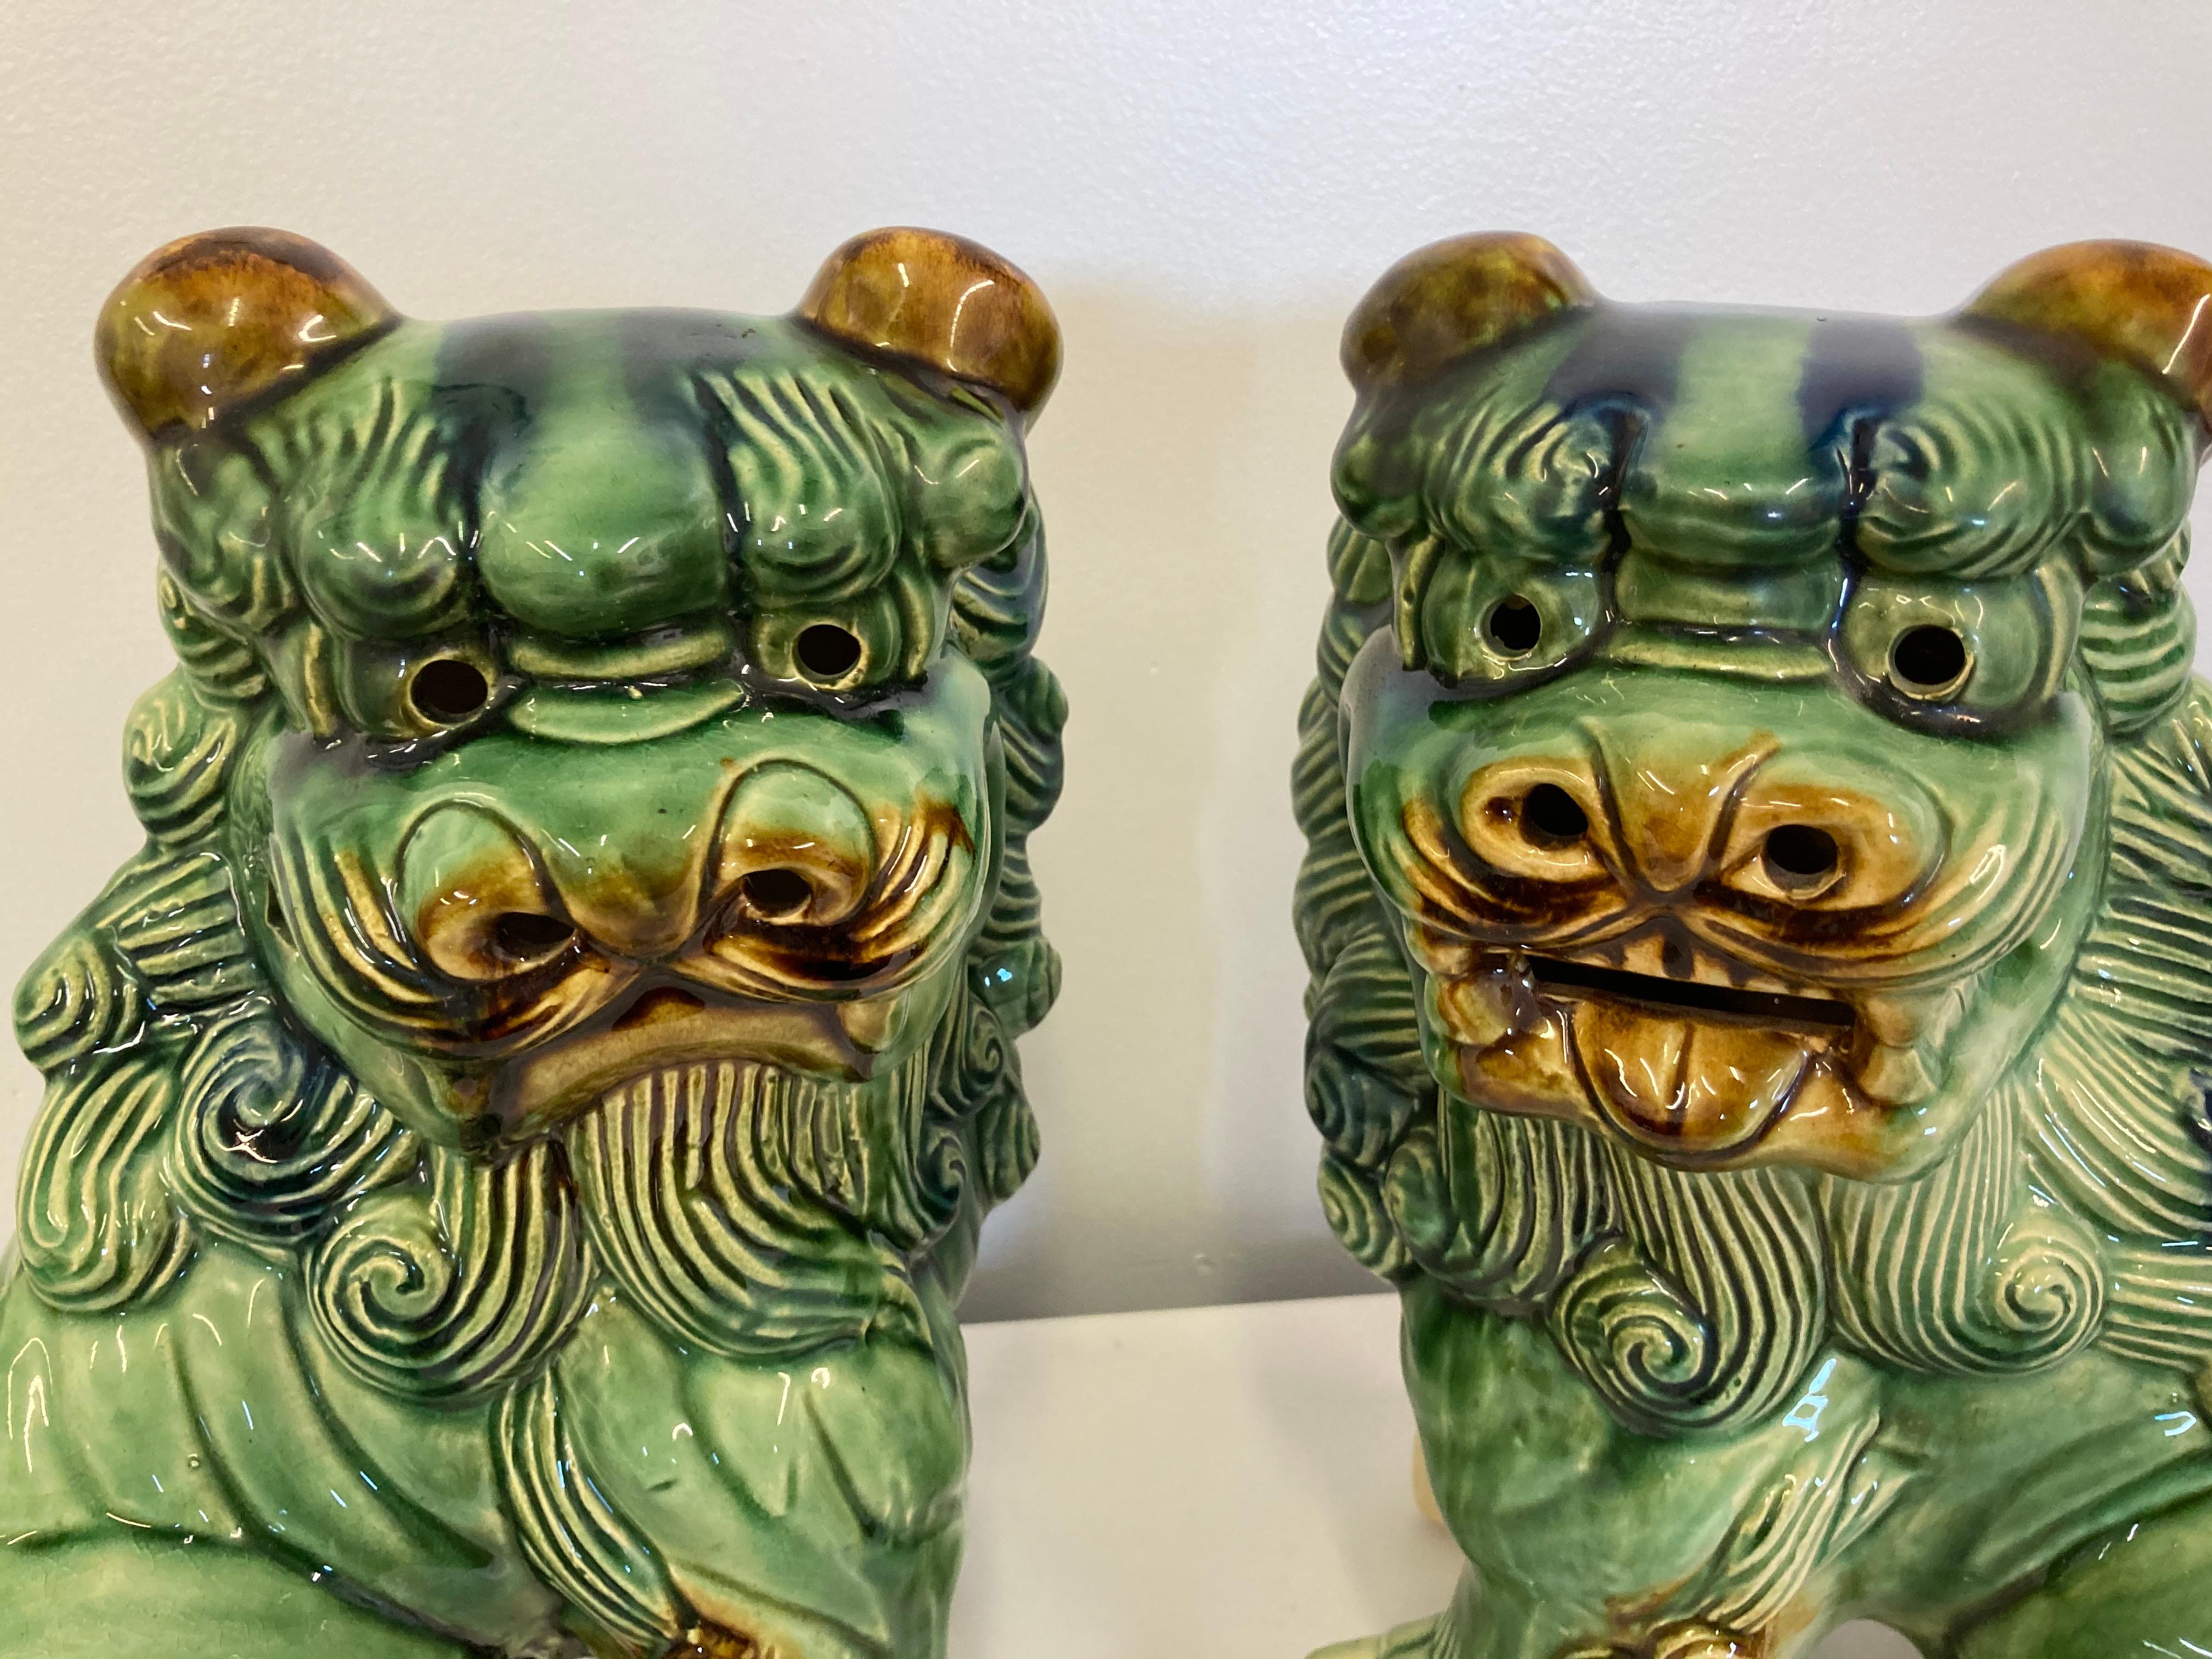 Offered is a pair of vintage or antique Chinese Food Dog figures. Features two dogs with their mouths open in slightly different manners. In good condition with some slight crazing and imperfections/bumps throughout. Please look at pictures